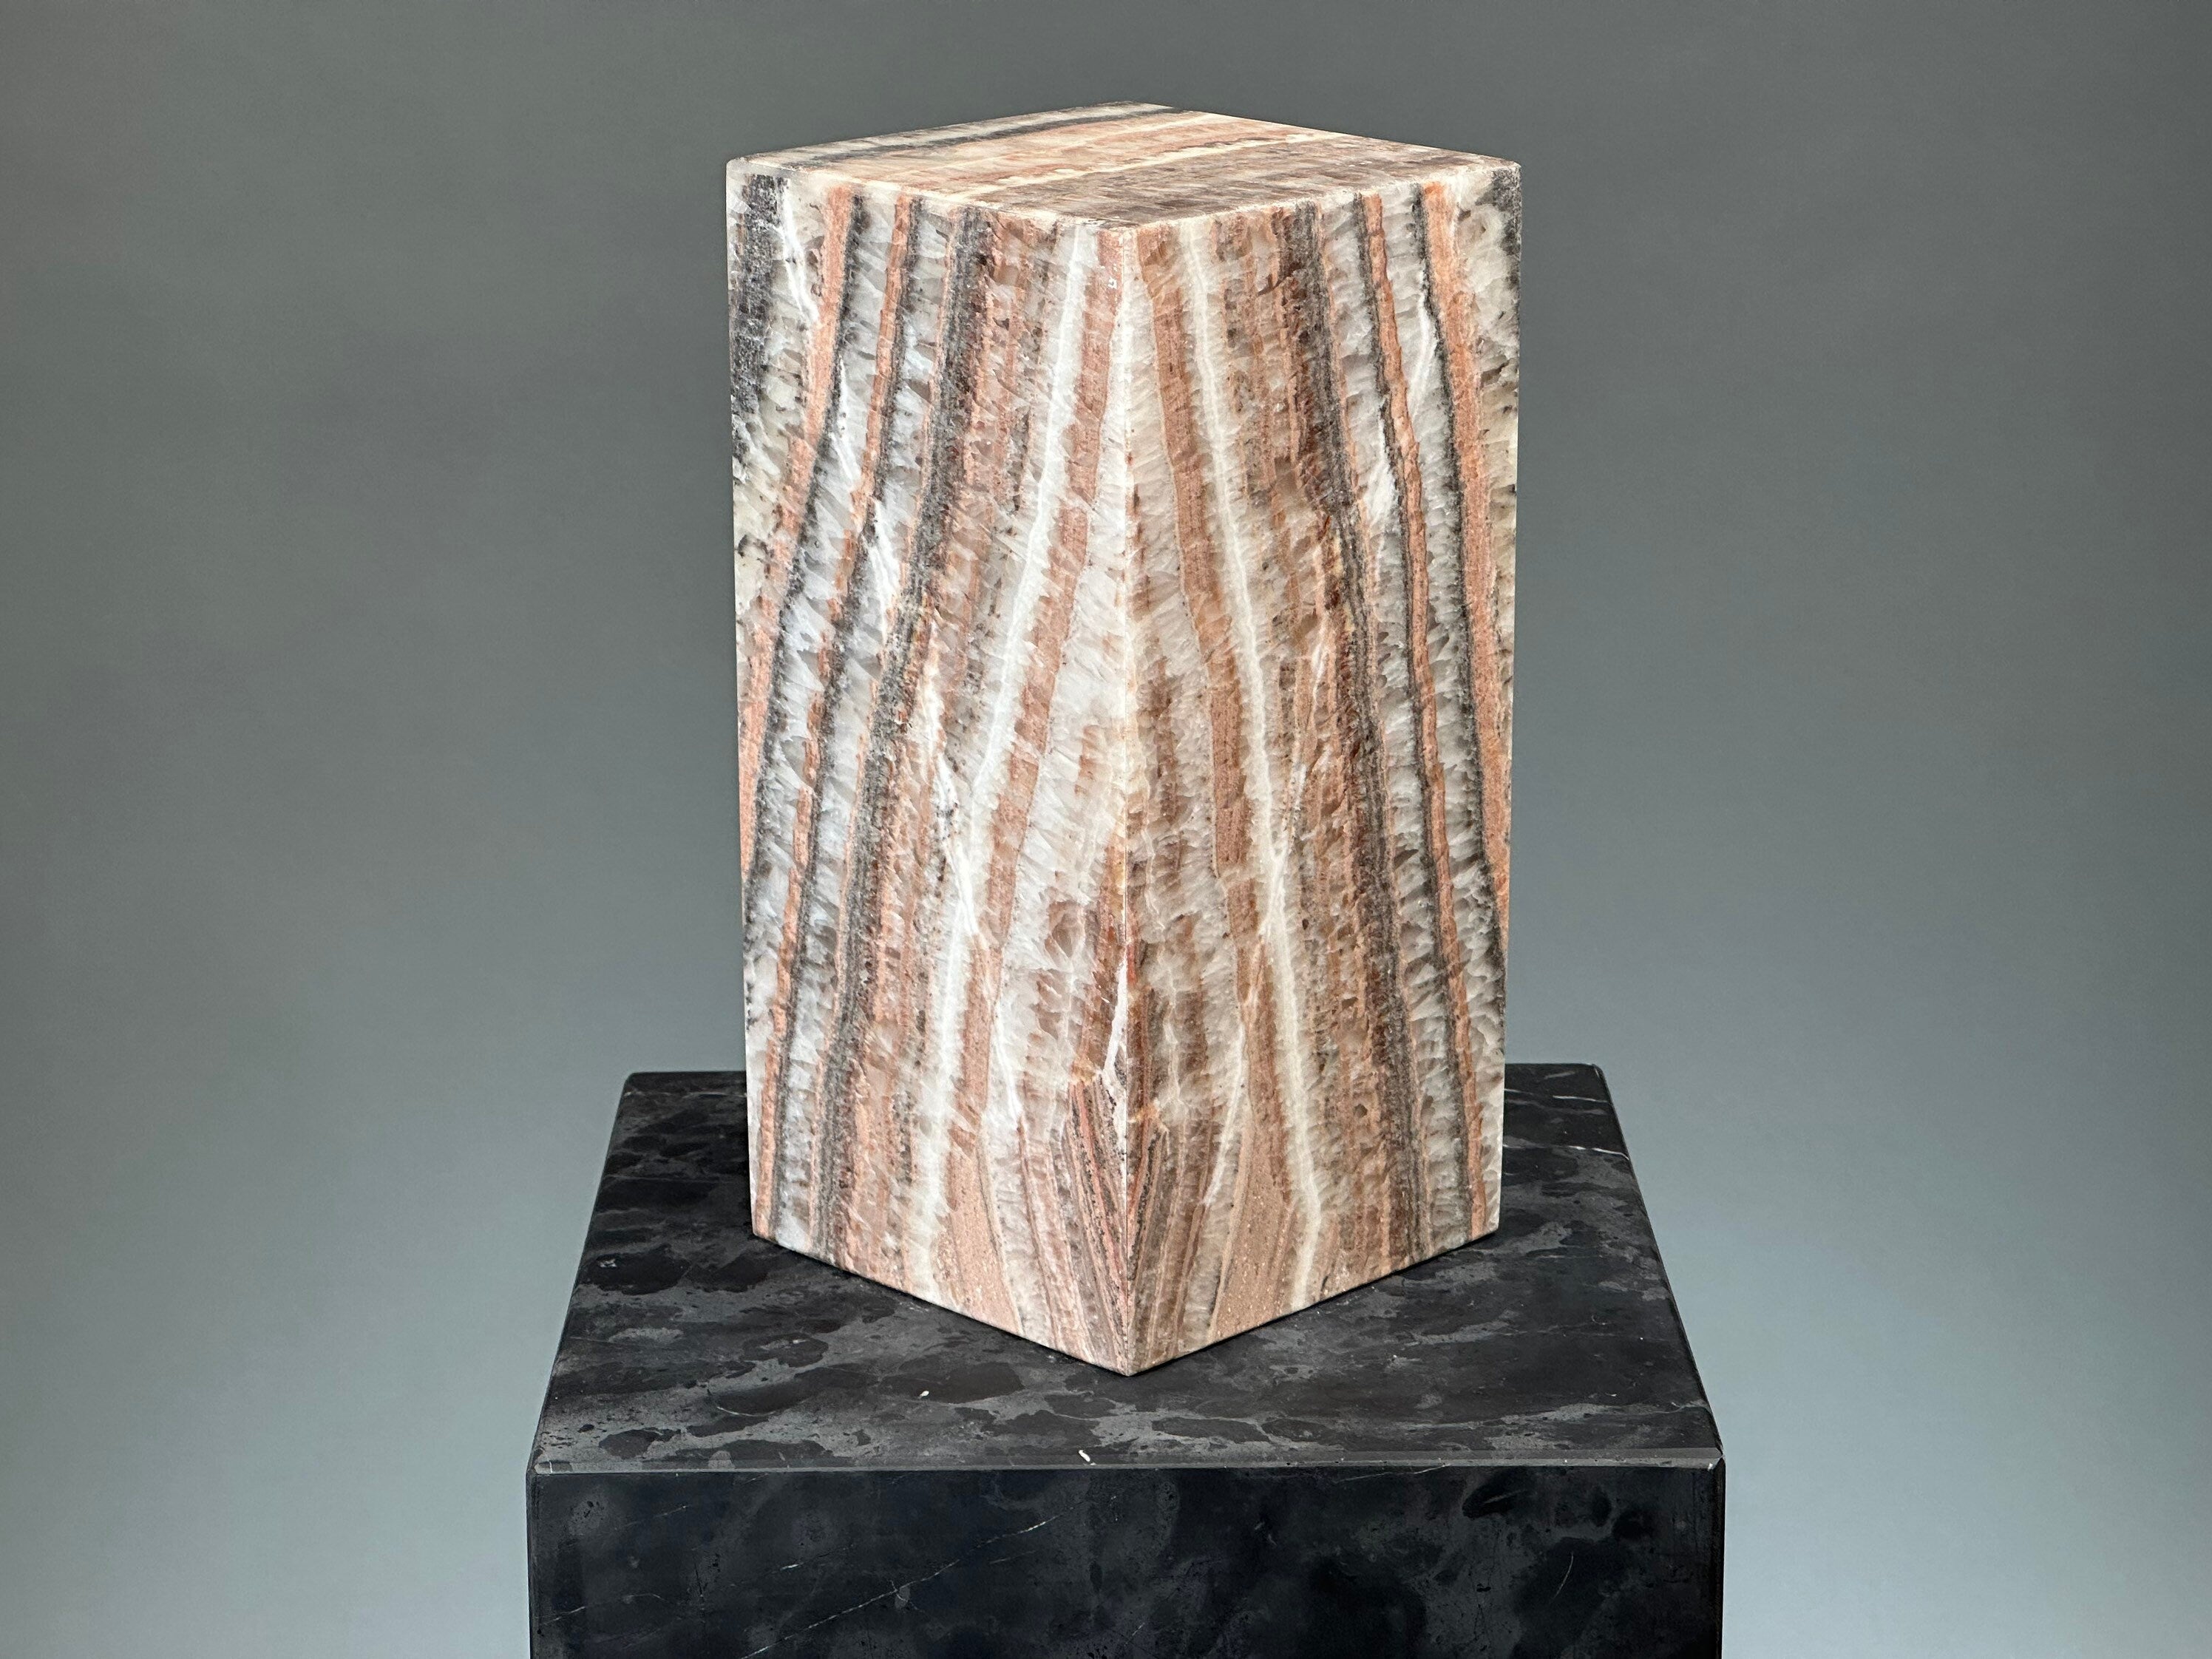 Stunning Onyx Table Lamp - Unique and Exquisite Stone Lamp for Living Room & Bedroom. An Eye-Catching Highlight for Your Home Dcor